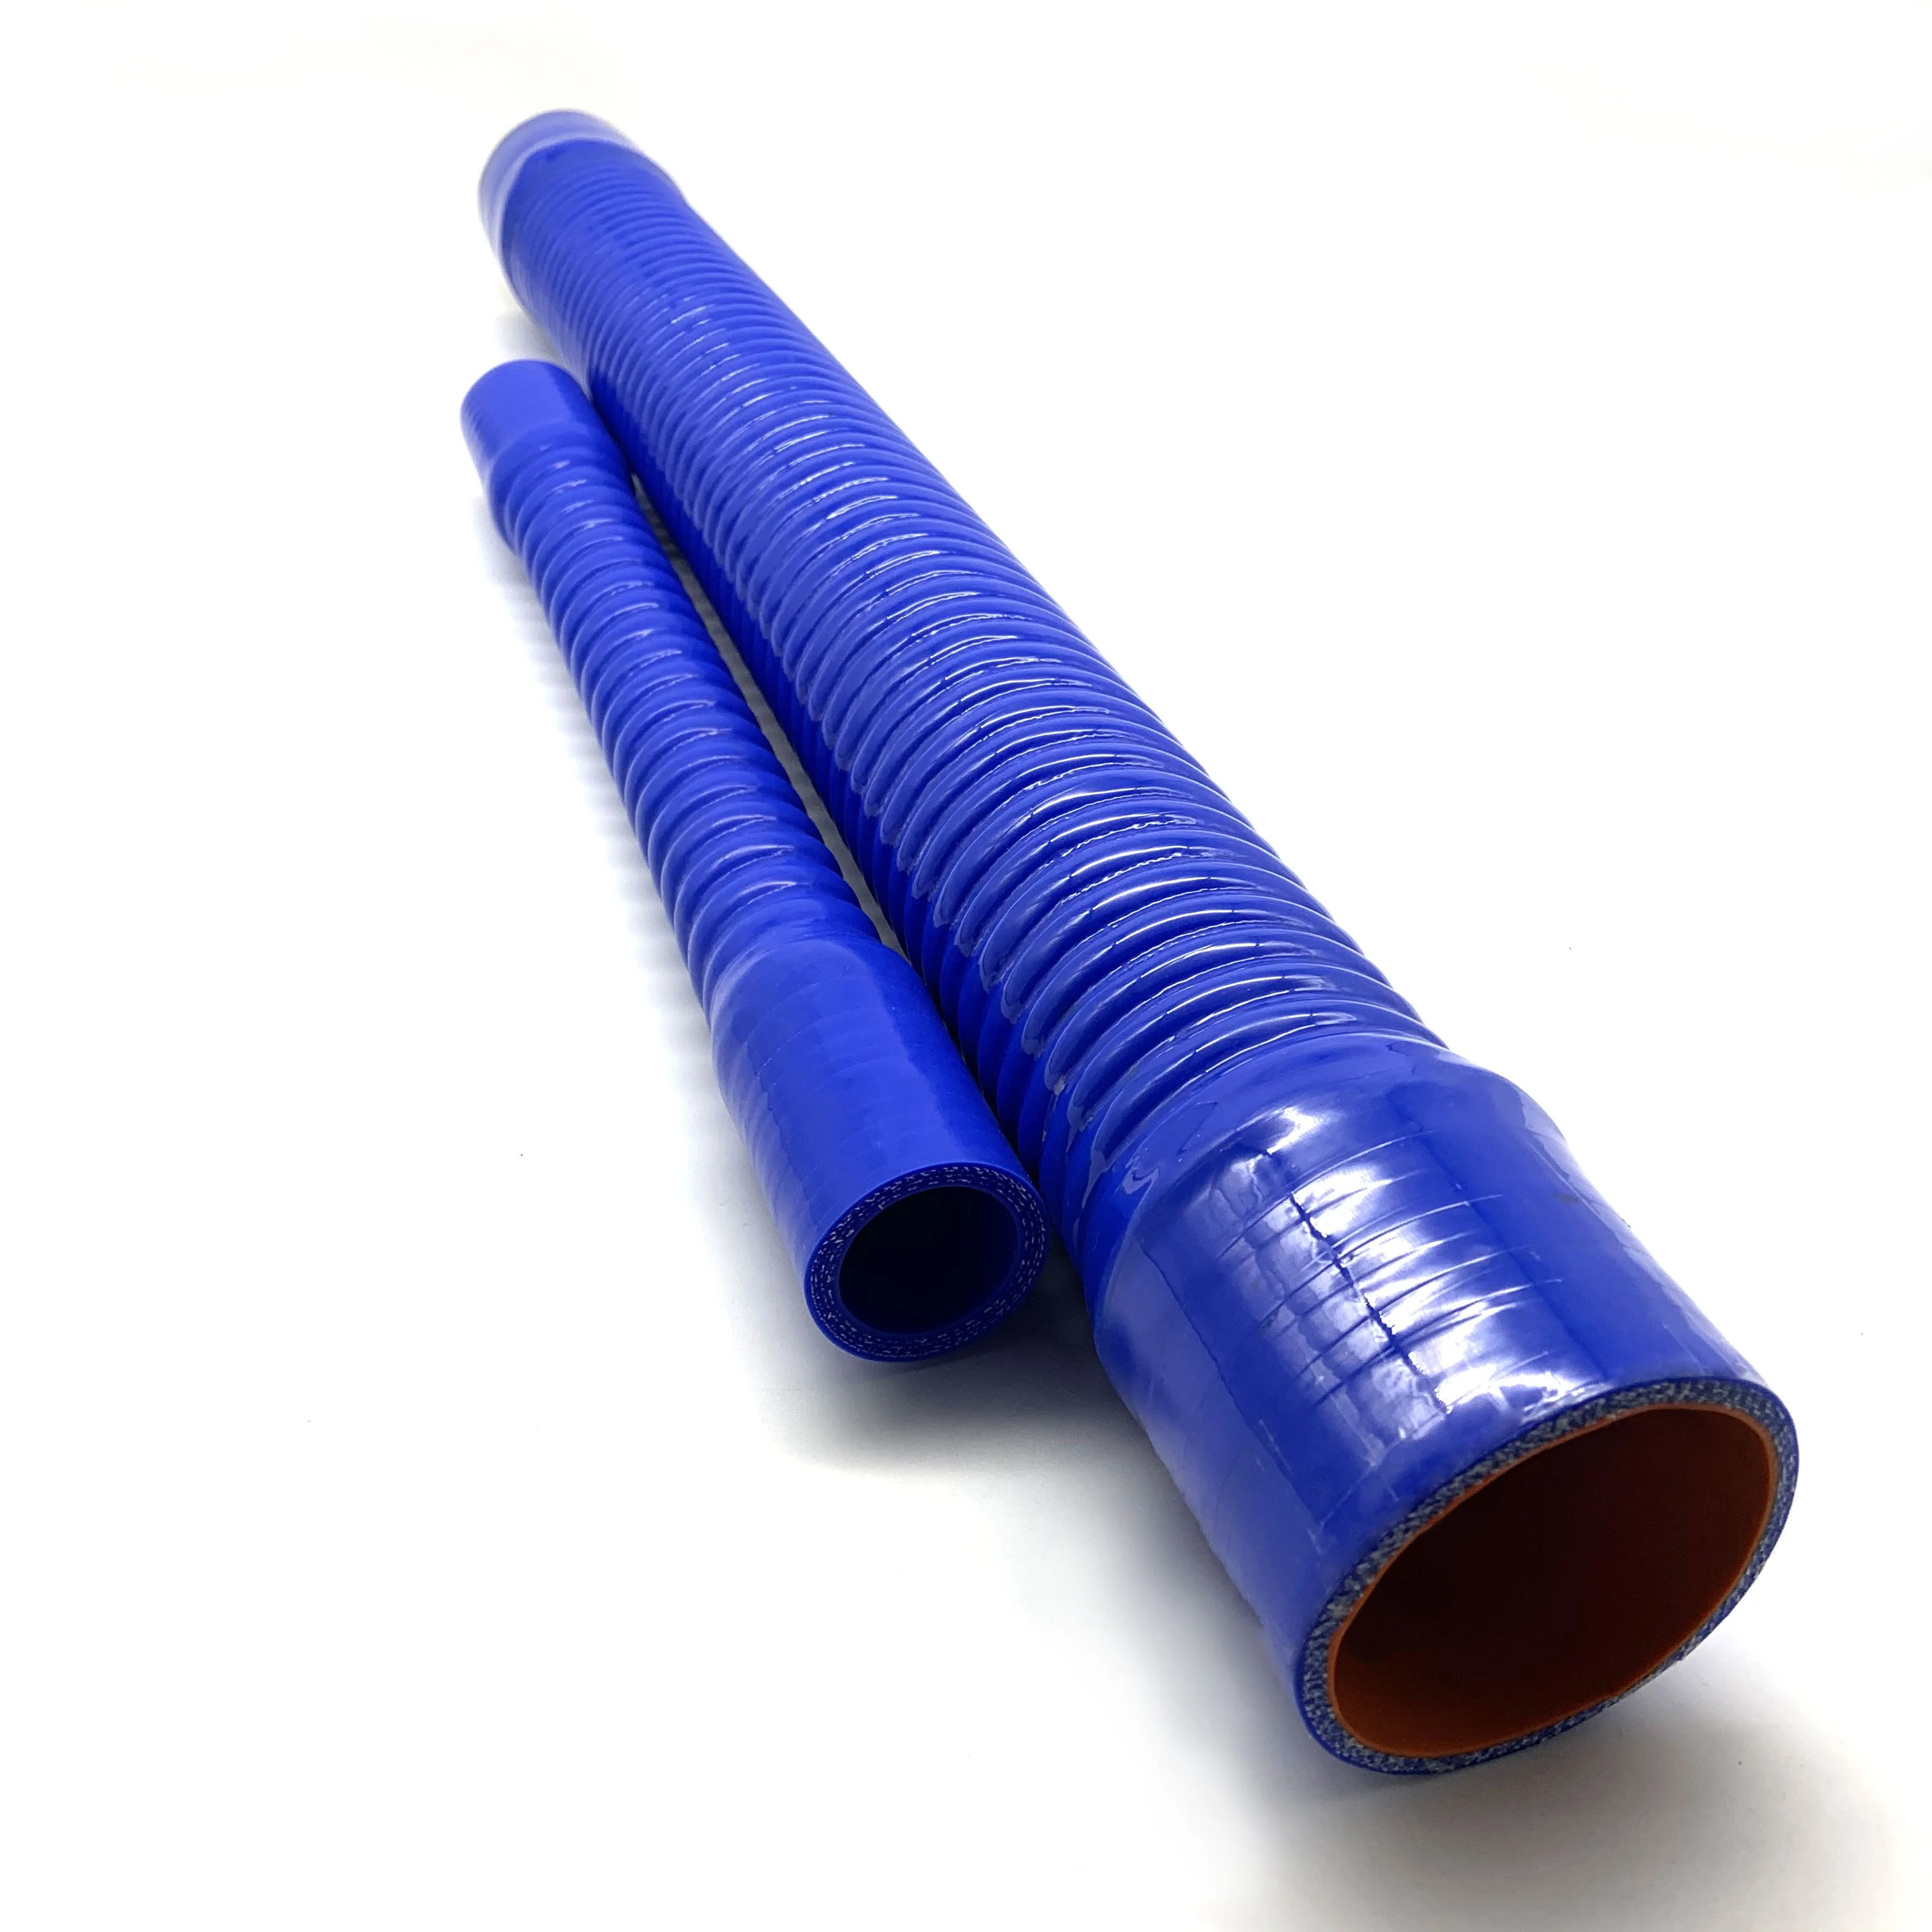 
Flexible Silicone Hose or EPDM Hose with Stainless Steel Wire Reinforced. 